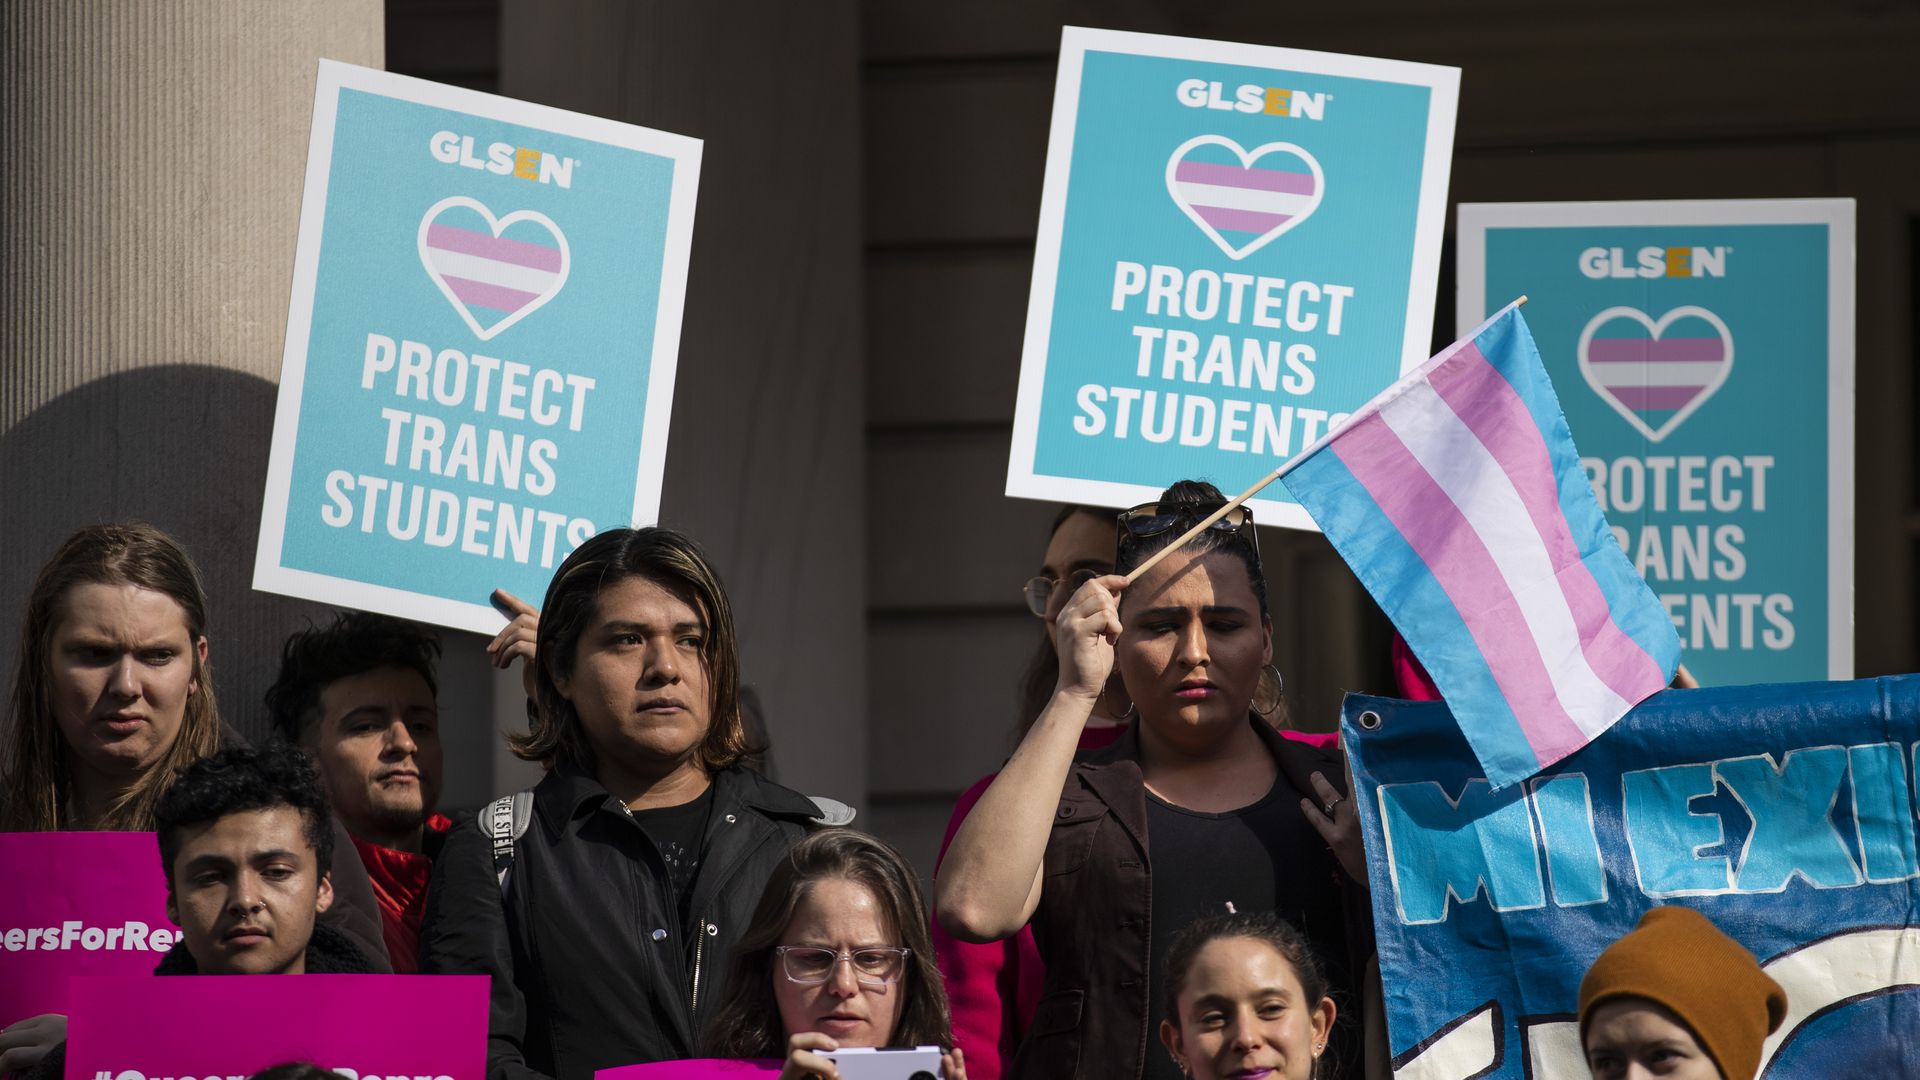 In this image, a transgender pride flag is waved while others hold signs that read "protect trans students"